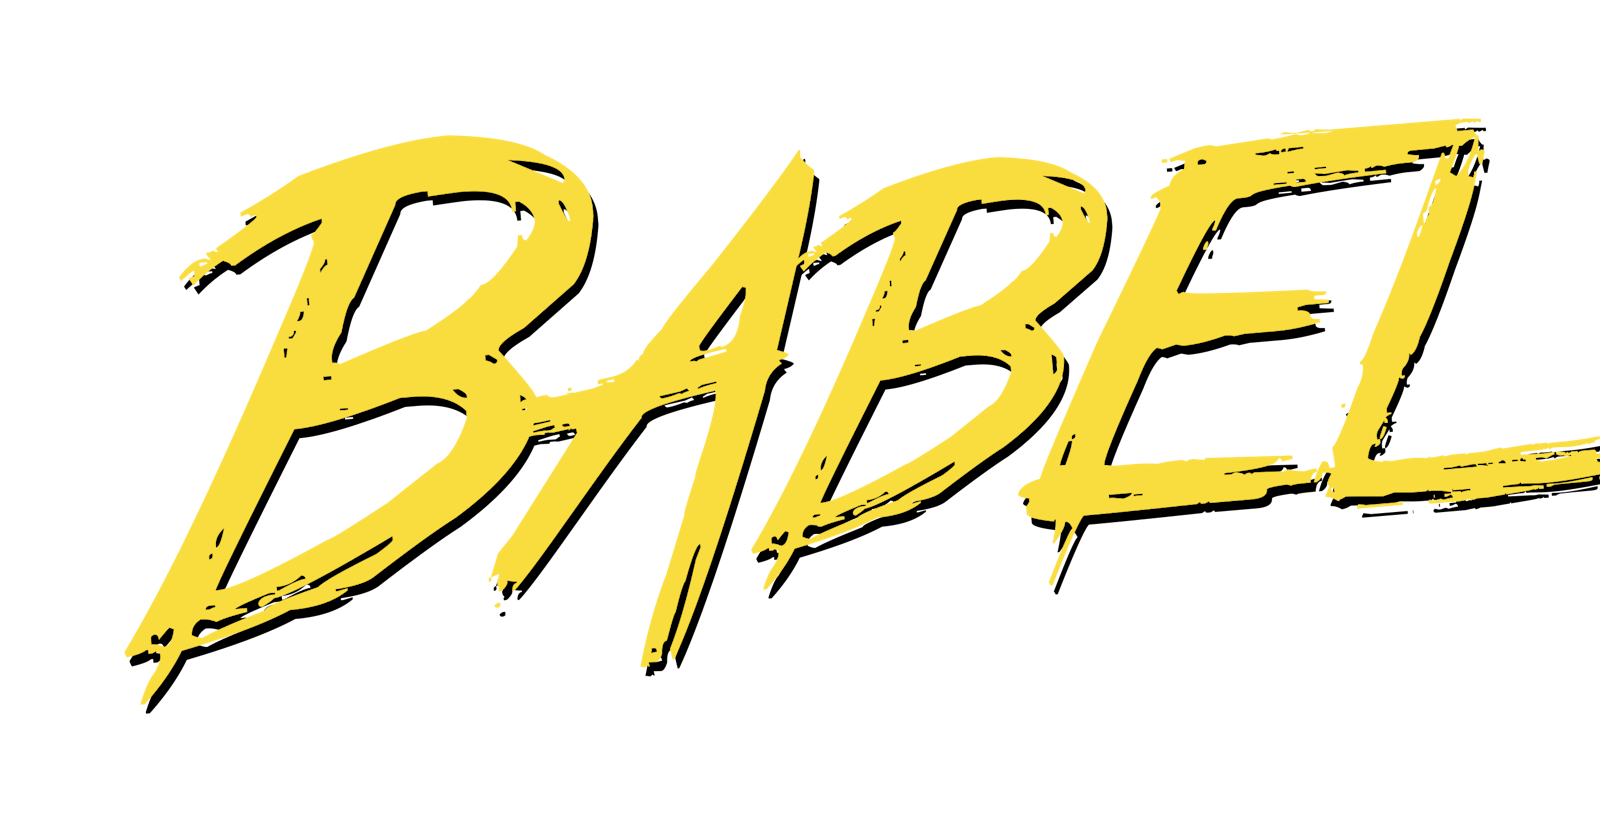 So, What exactly is Babel?